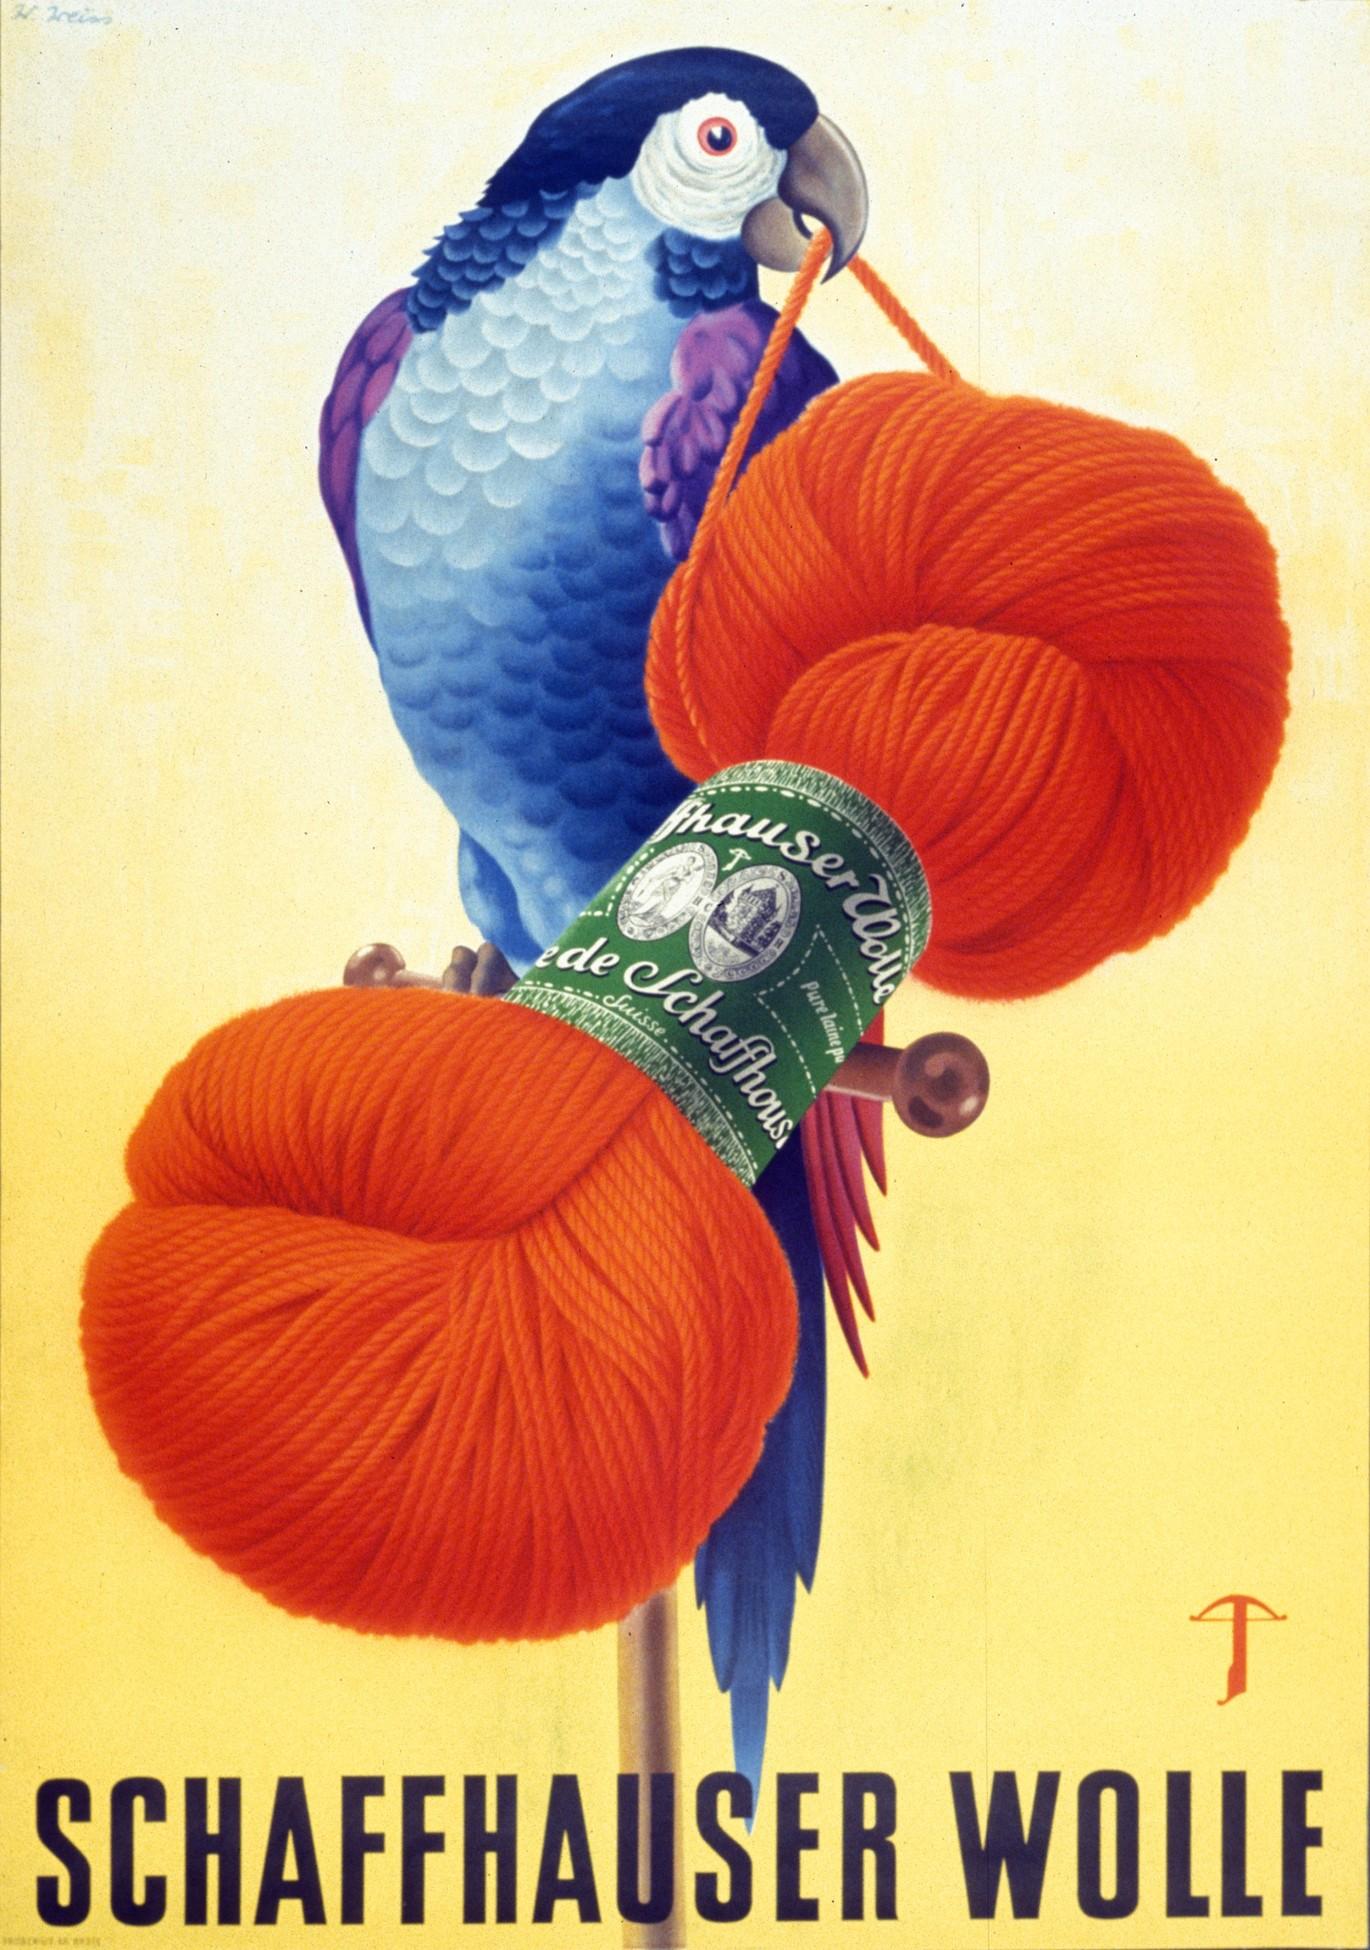 poster with a parrot holding a ball of wool